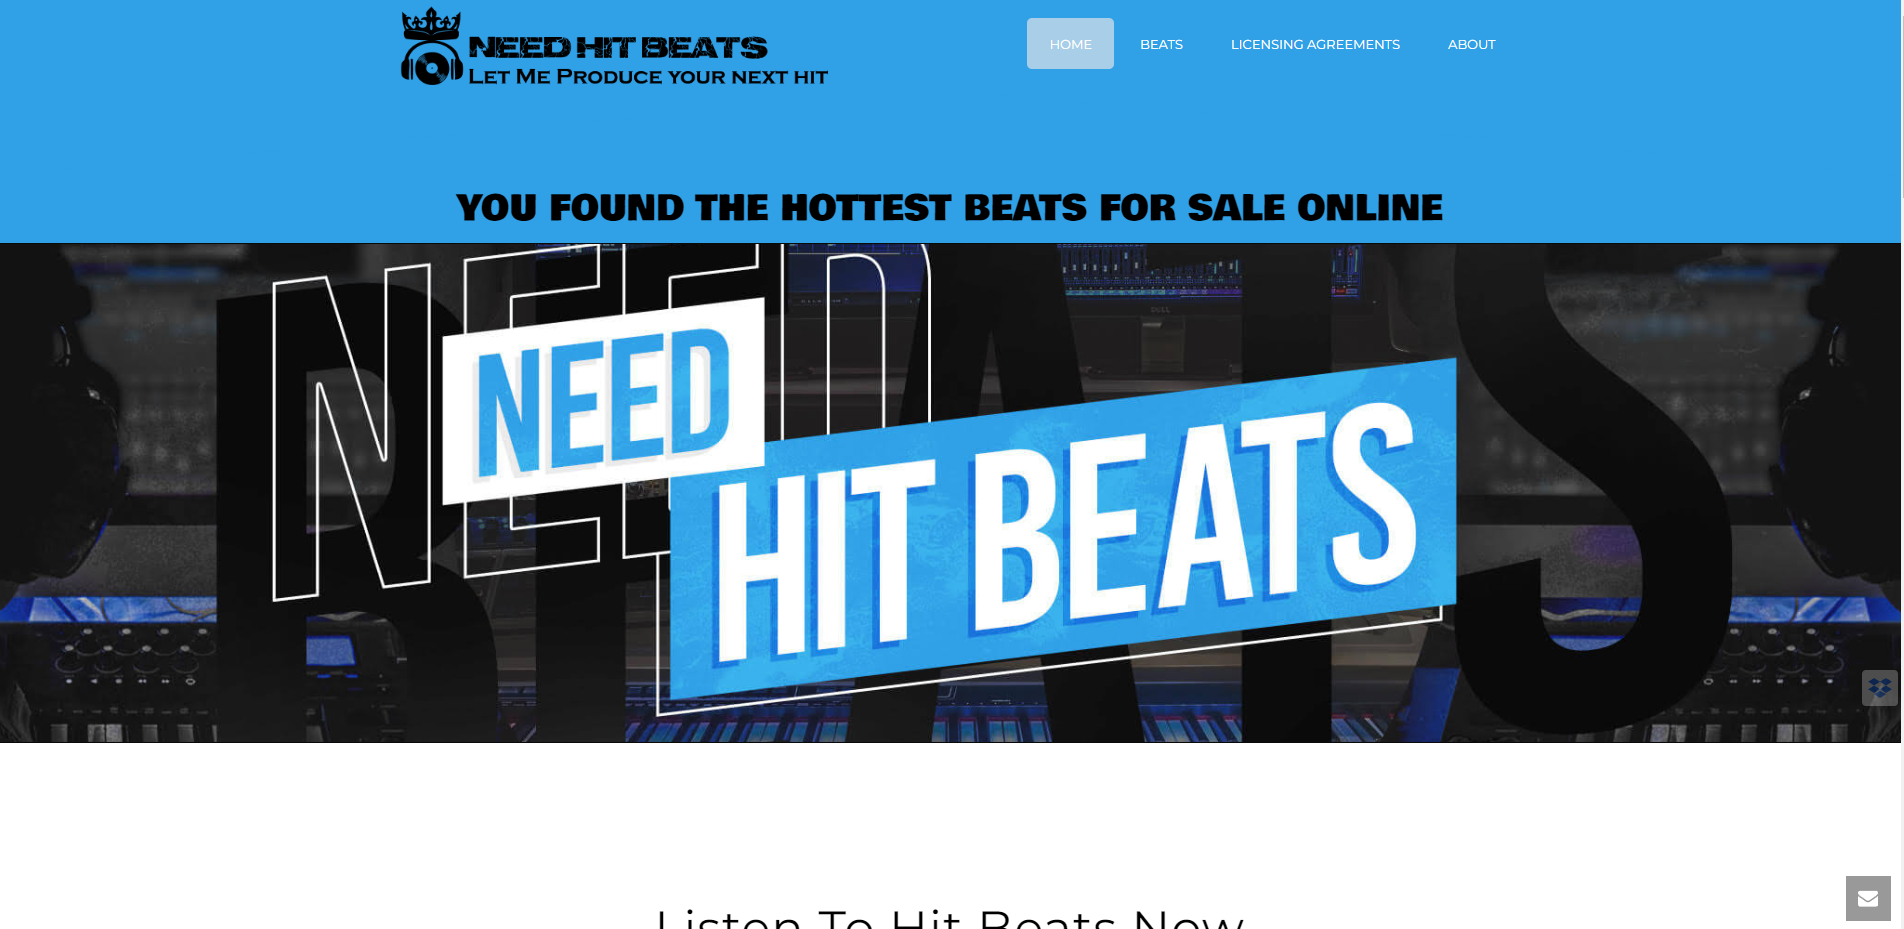 Need Hit Beats Hottest Beats Online Picture